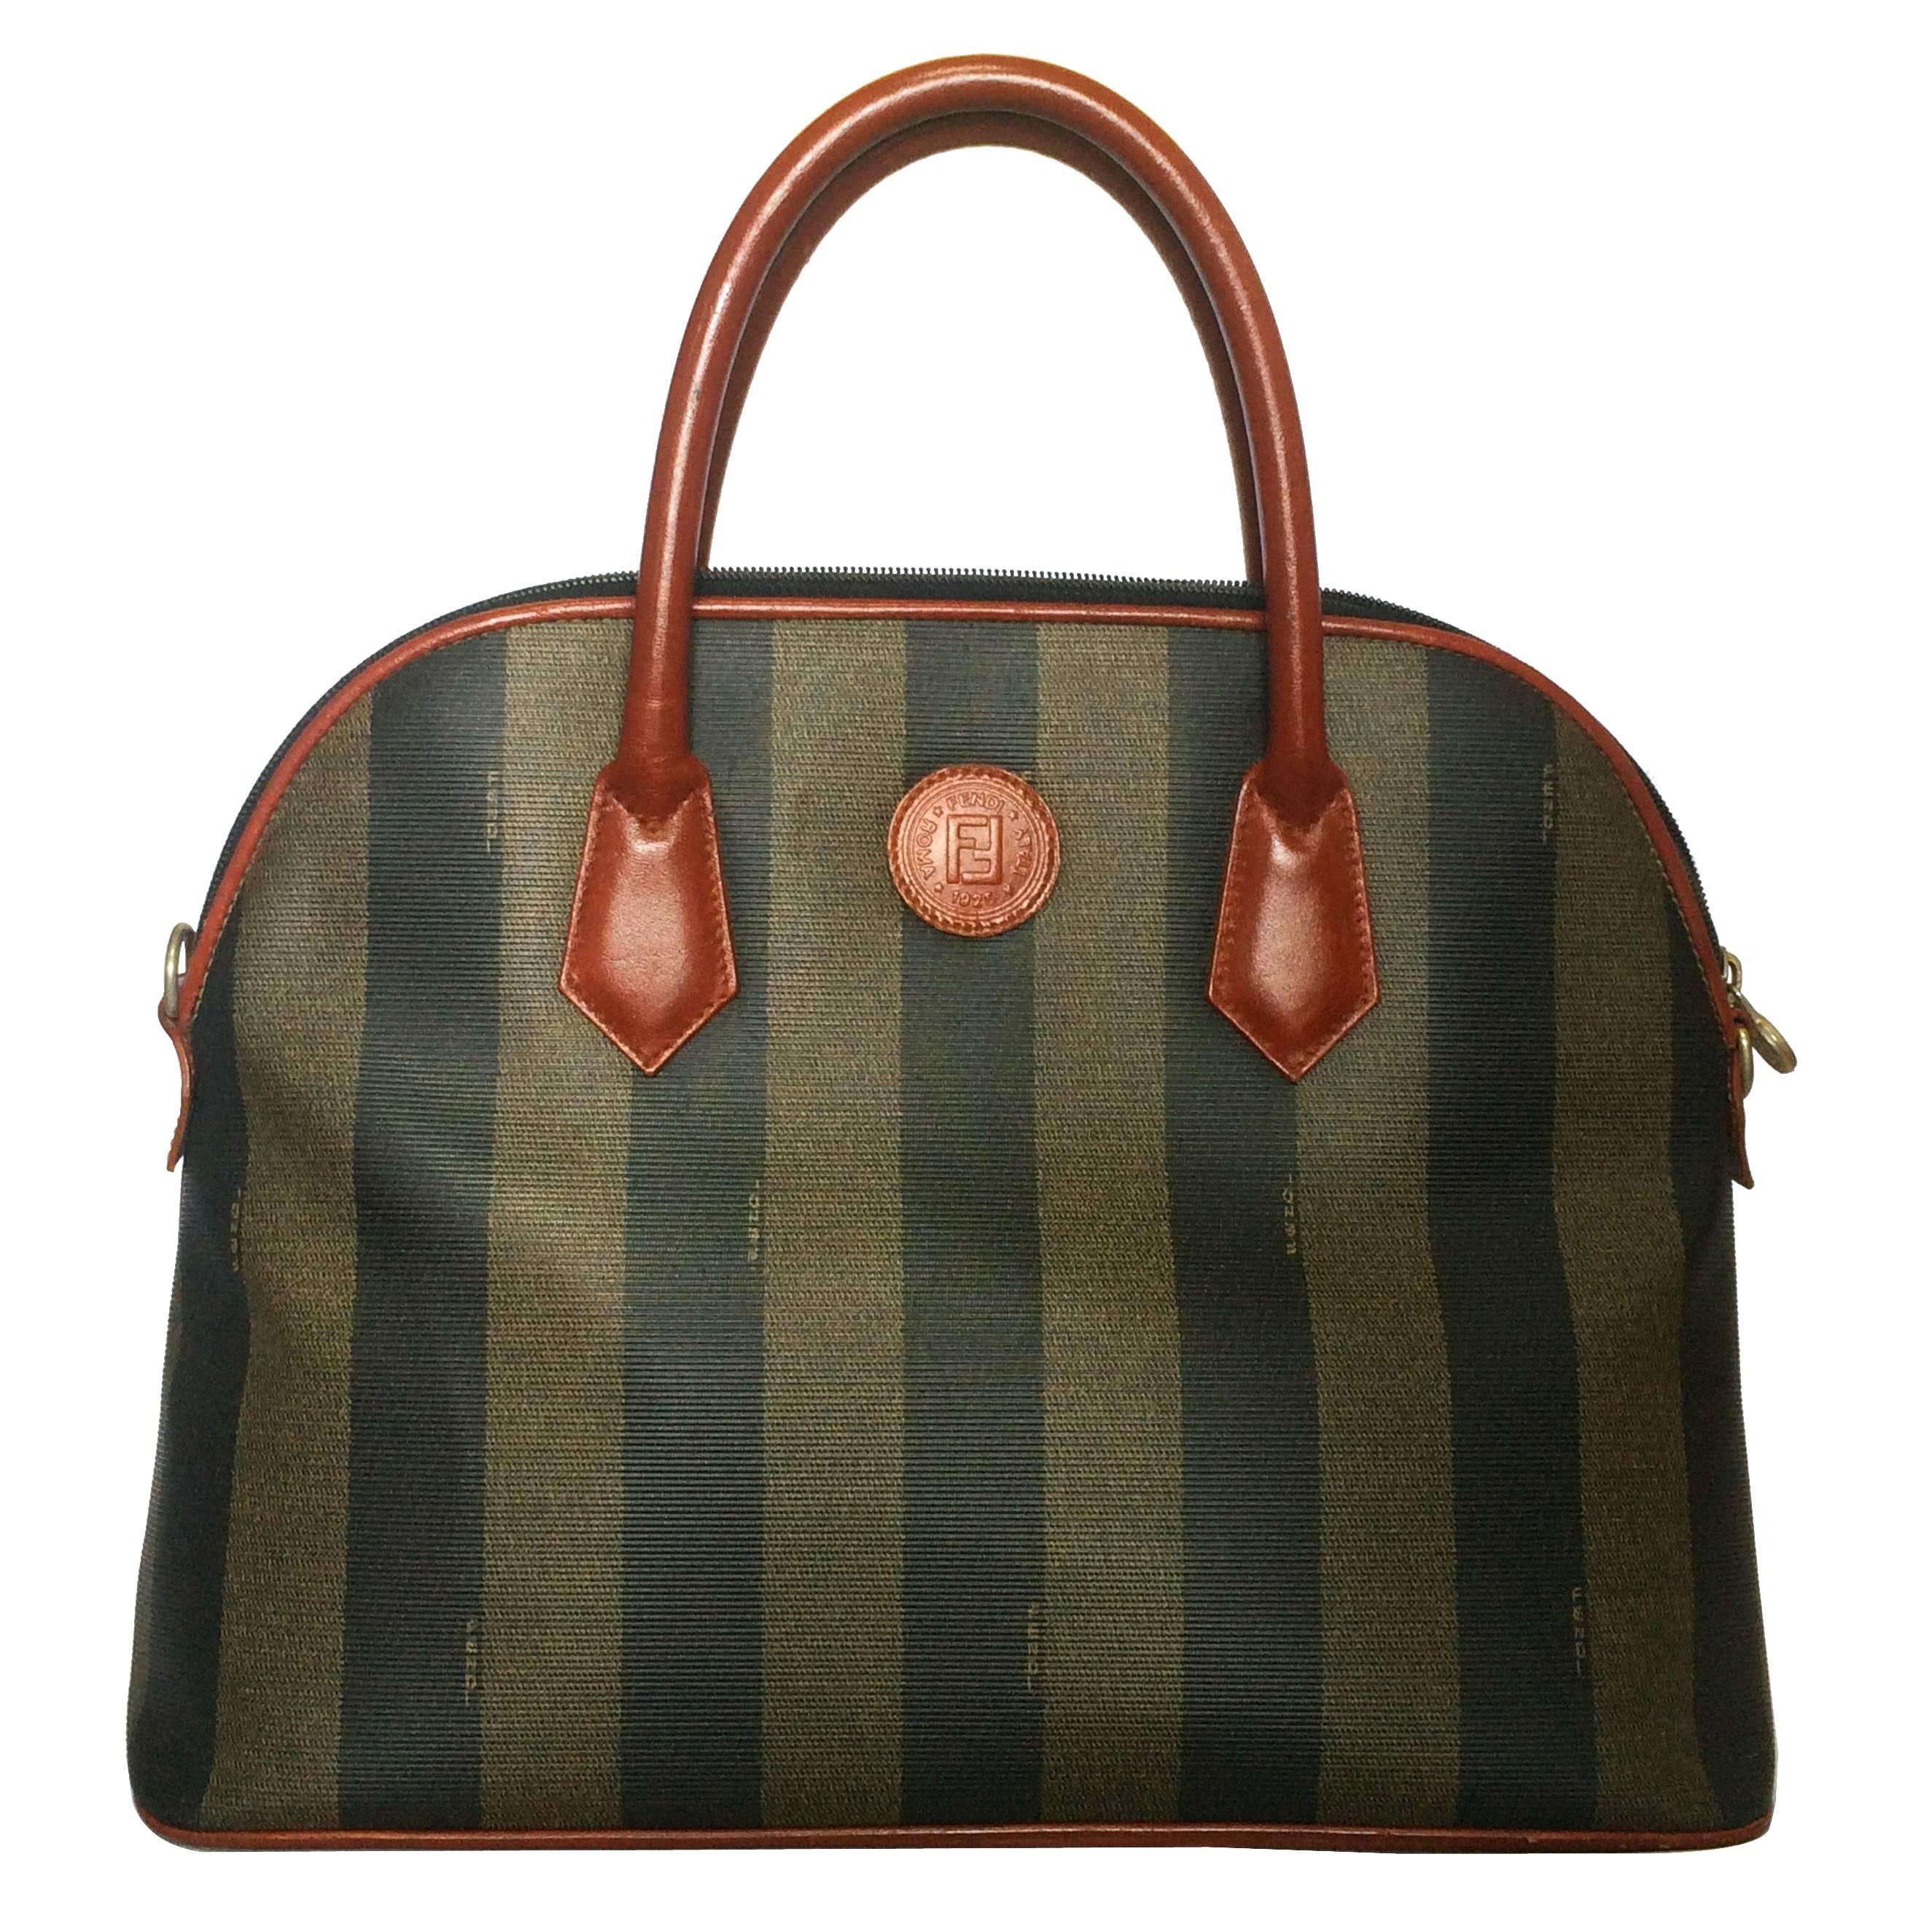 Vintage FENDI pecan khaki and grey stripe bolide tote bag with leather handles.